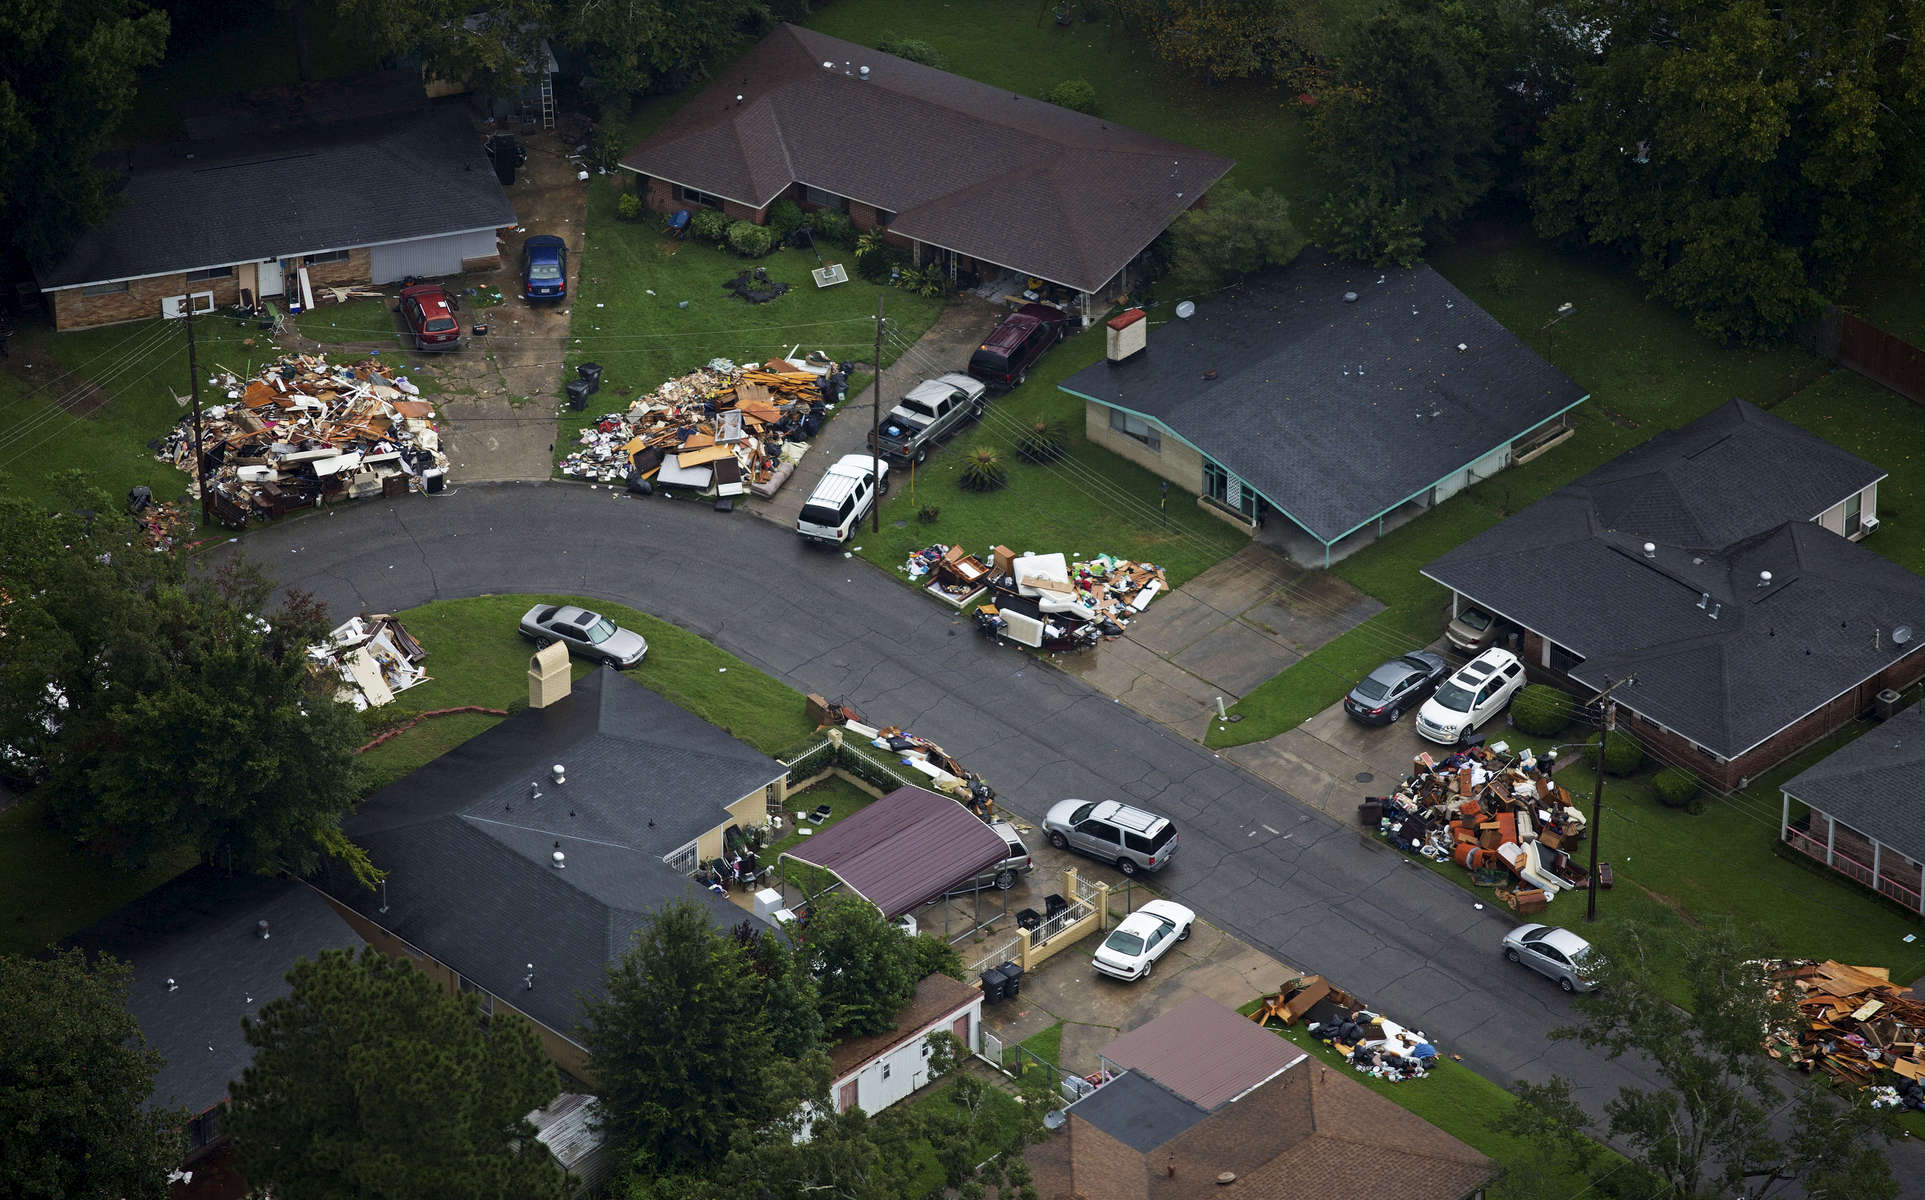 Debris from gutted homes can be seen in front of homes in this areal view of Baton Rouge, La. USA, Thursday, Aug. 25, 2016. President Obama signed a Louisiana disaster declaration on Aug. 14, making federal disaster funding available. (AP Photo/Max Becherer)